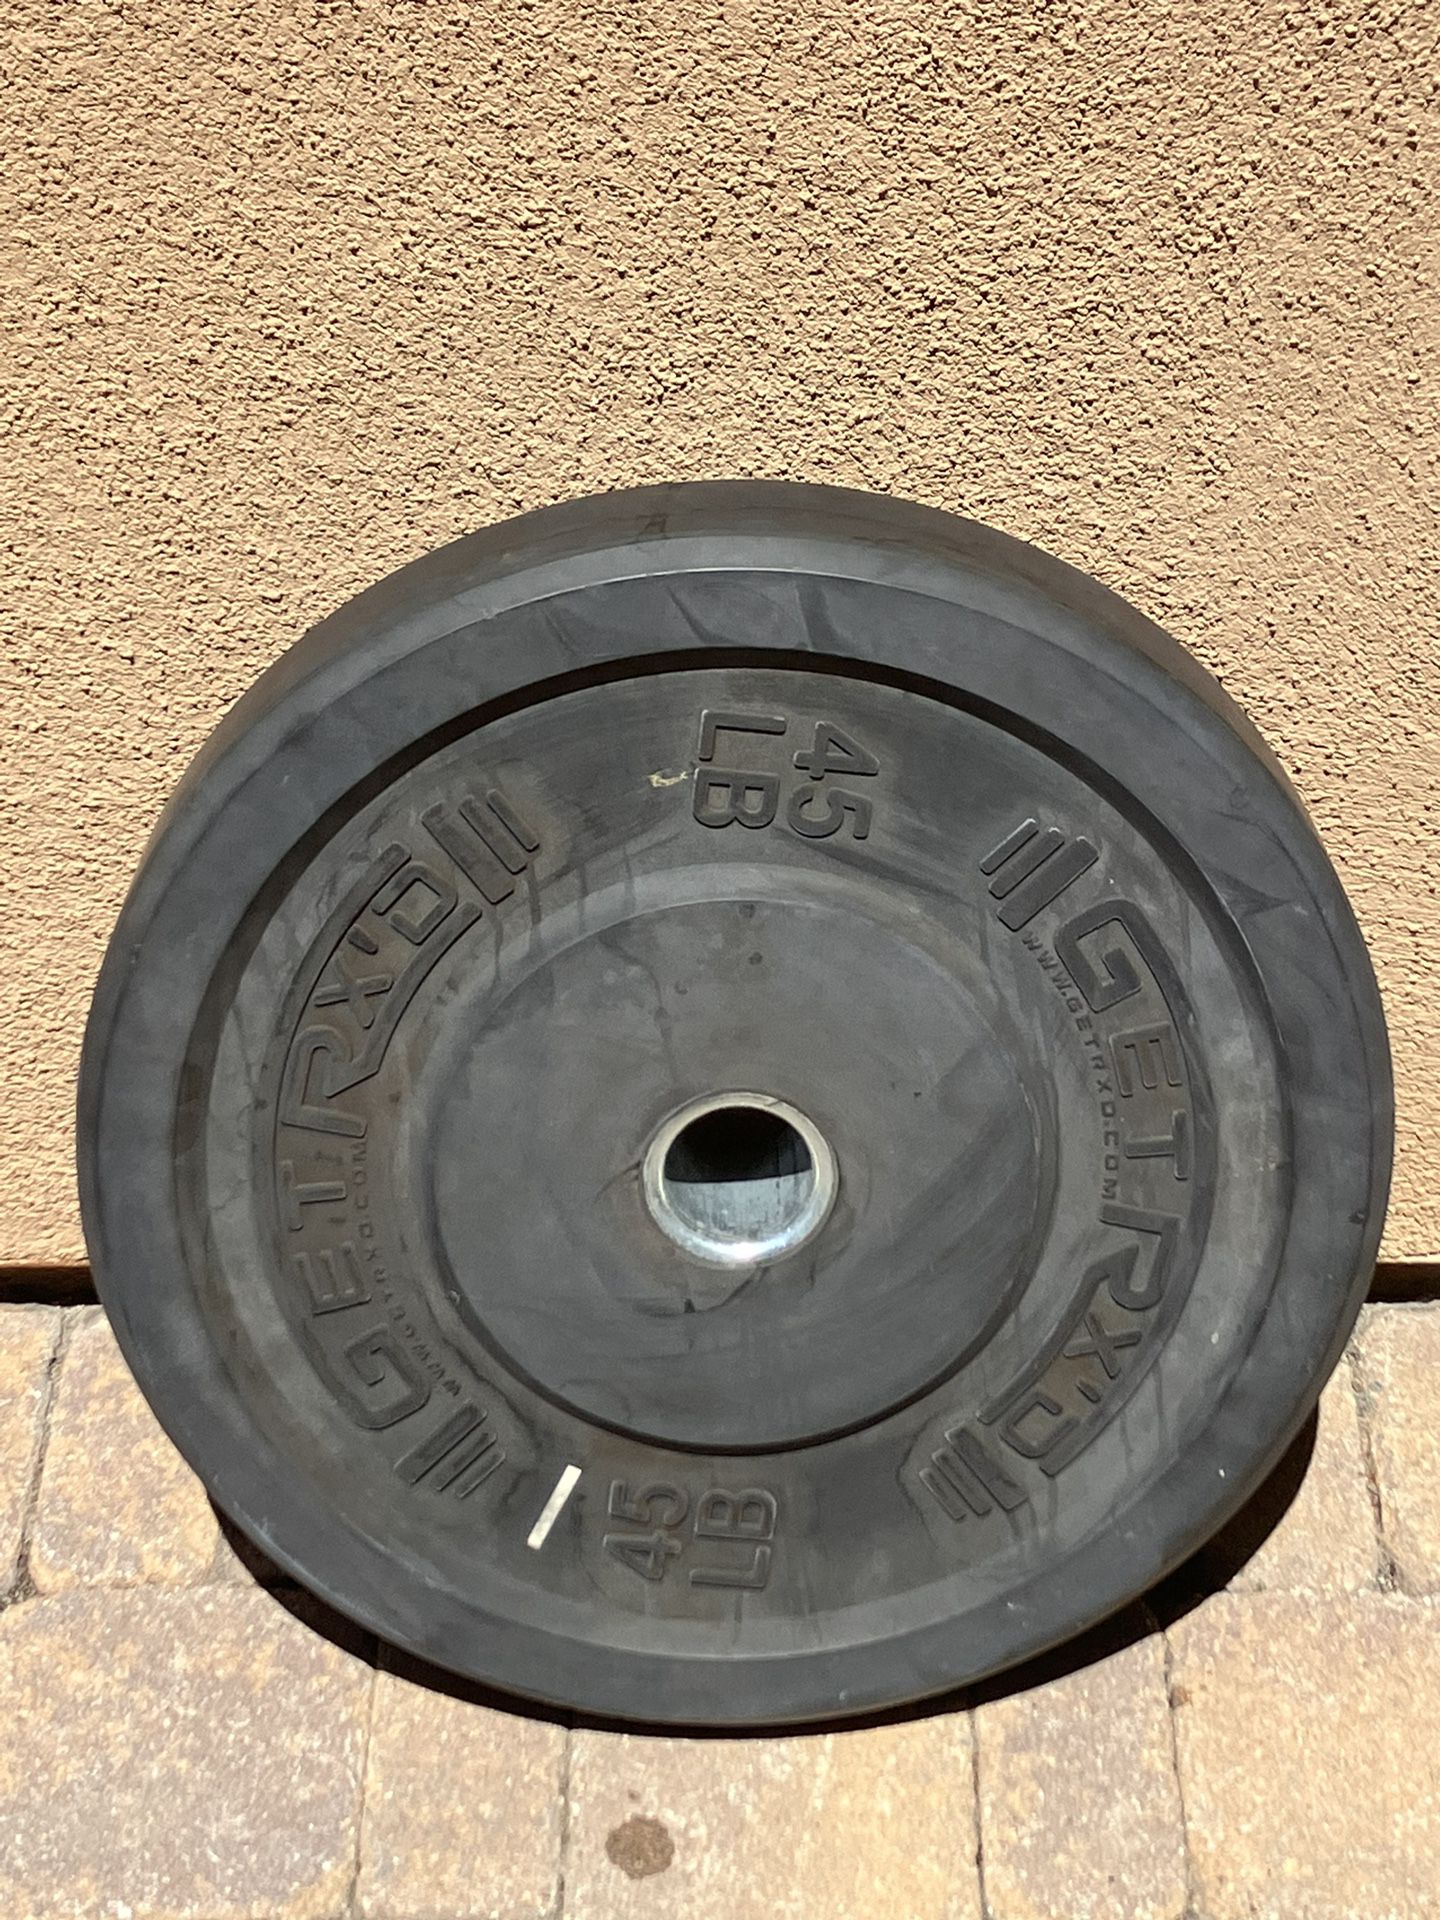 Bumper Plates solid rubber olympic weights